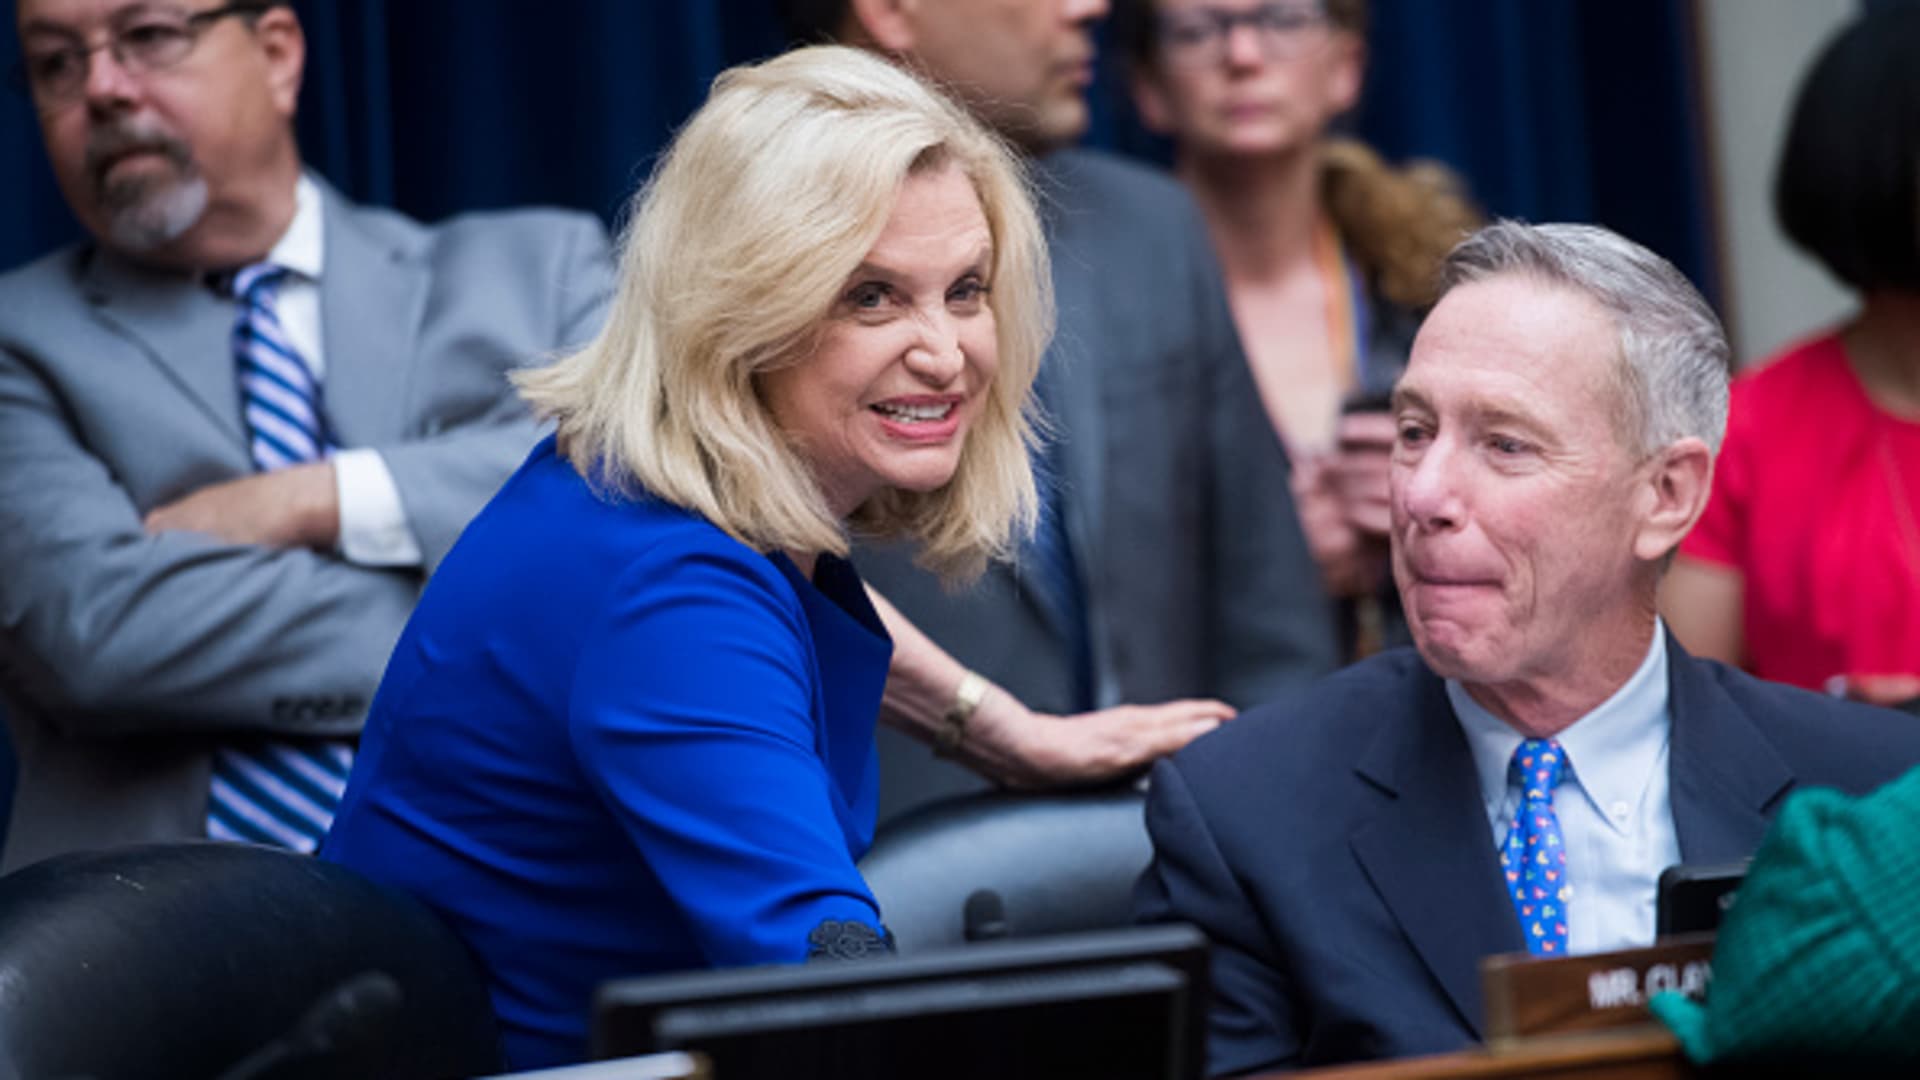 Reps. Carolyn Maloney, D-N.Y., and Stephen Lynch, D-Mass., are seen during a House Oversight and Reform Committee markup in Rayburn Building on a resolution on whether to hold Attorney General William Barr and Secretary of Commerce Wilbur Ross in contempt of Congress on Wednesday, June 12, 2019.